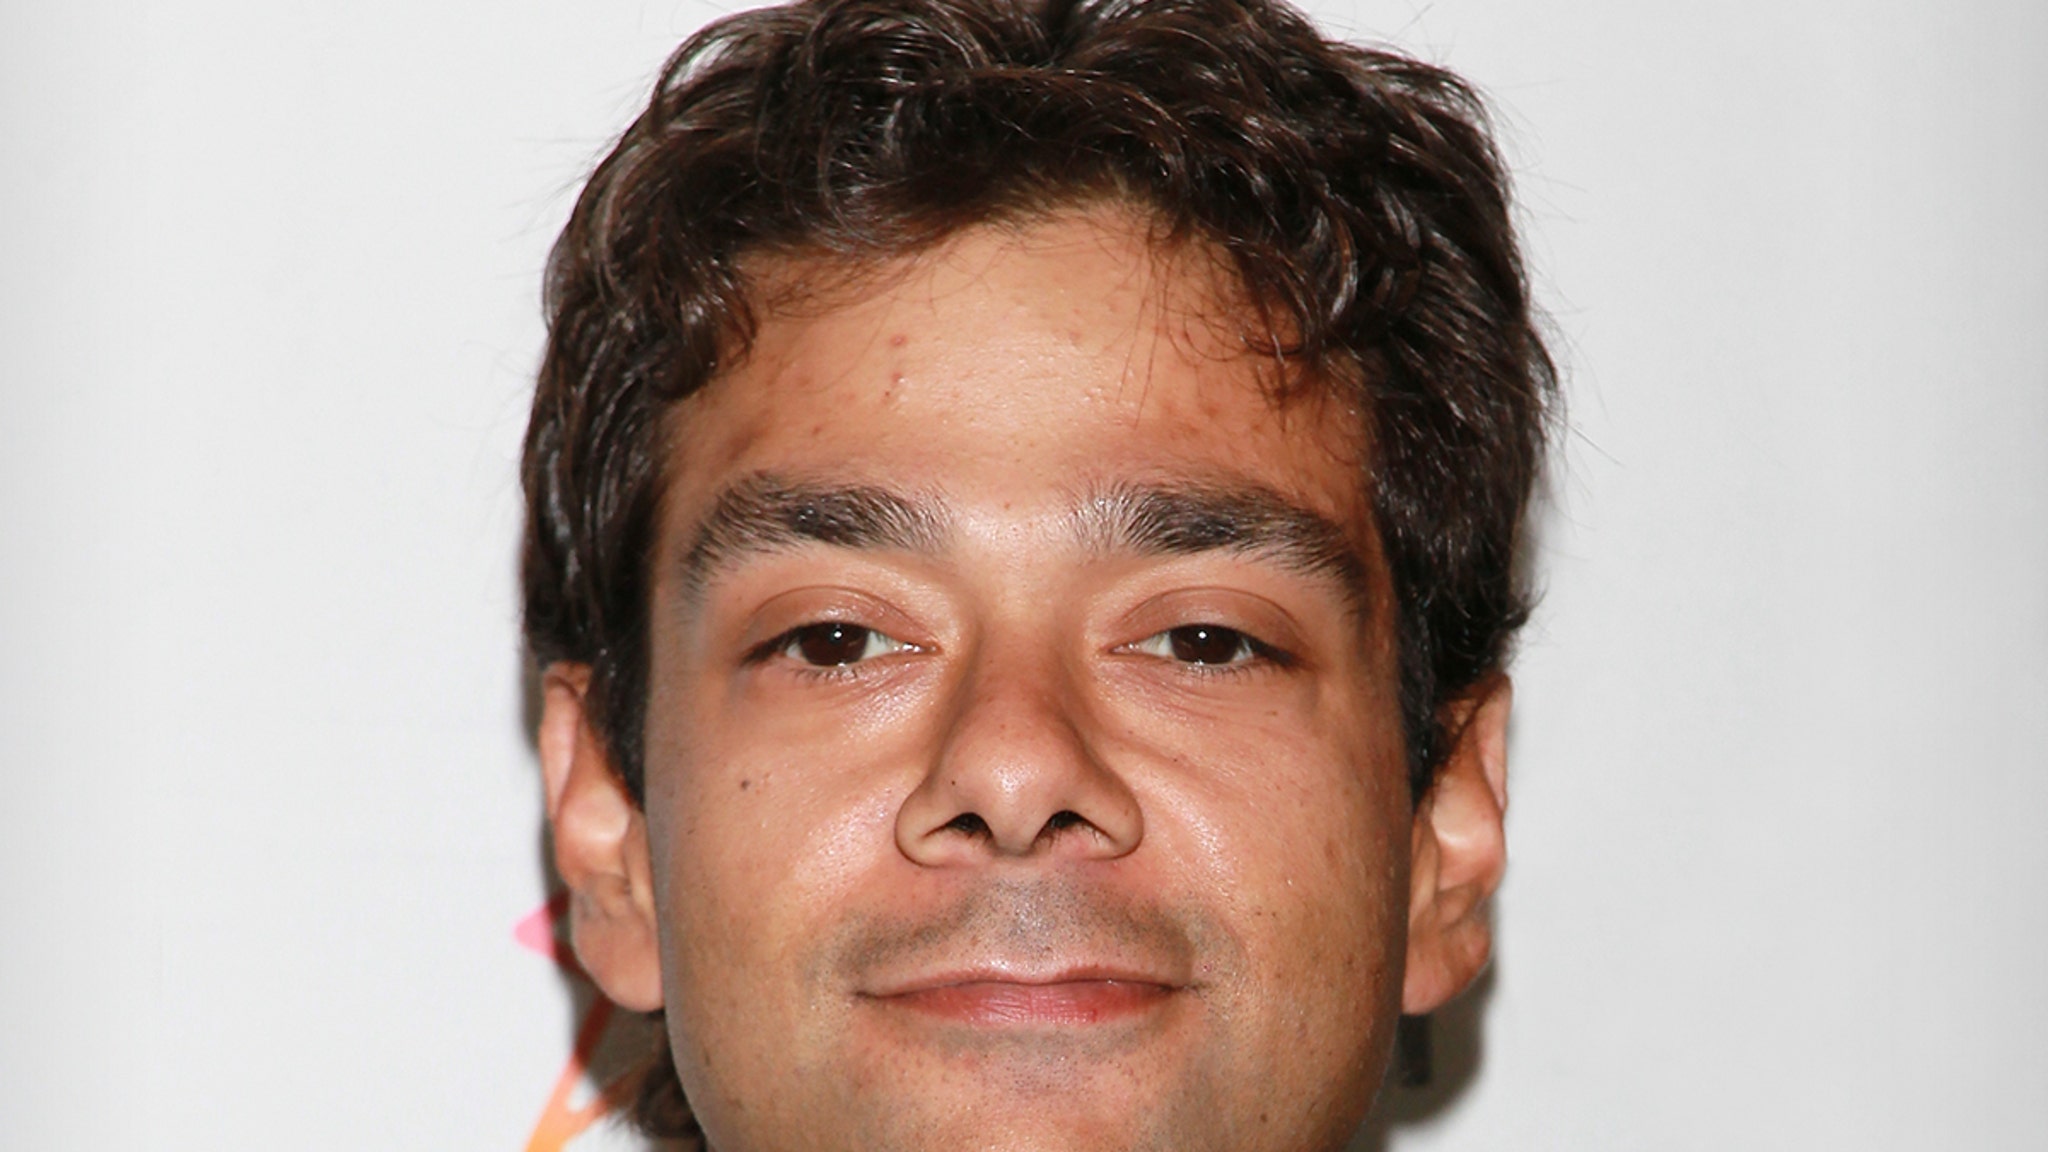 Mighty Ducks' Star Shaun Weiss Looking Healthy After Meth Bust